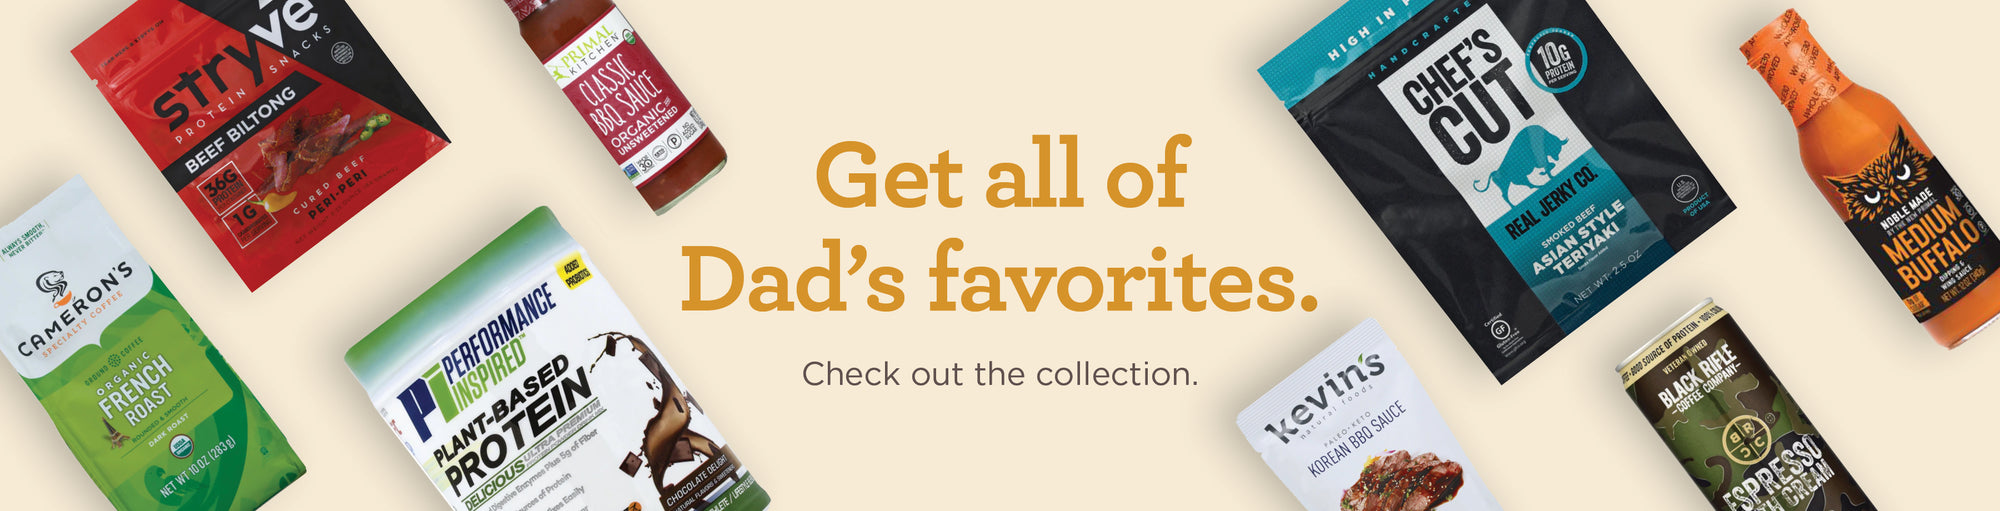 Get all of Dad's favorites. Check out the collection!